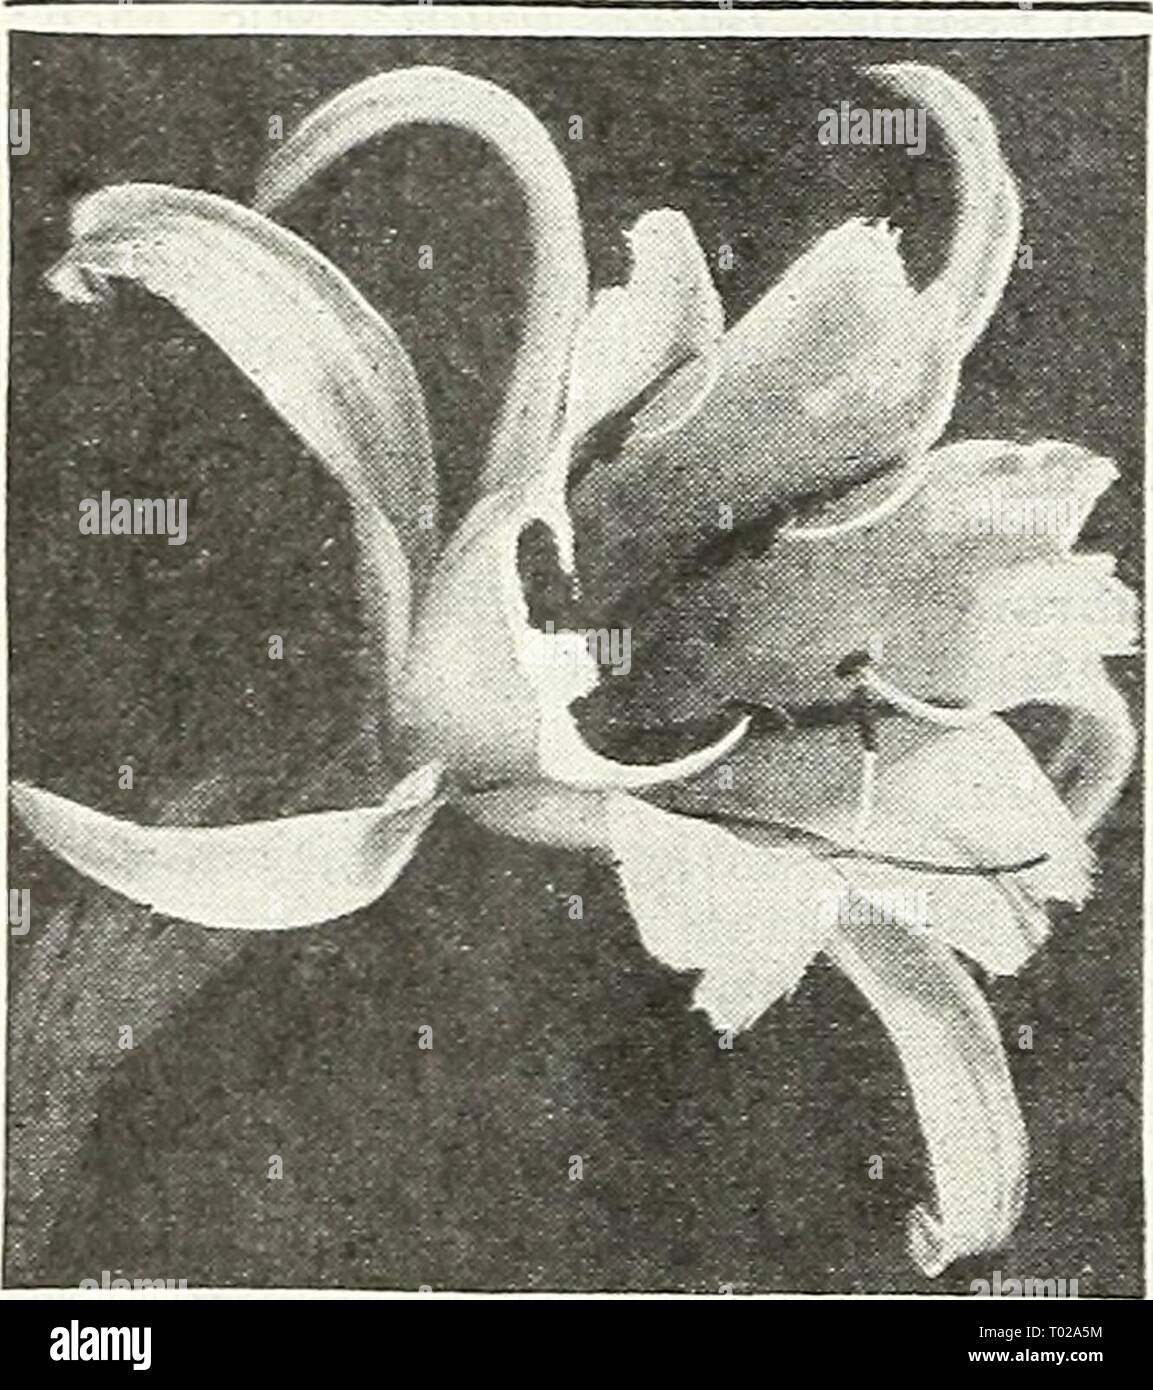 Dreer's garden book for 1947 . dreersgardenbook1947henr Year: 1947  Hyacinthus candicans Summer Hyacinth Cape Hyacinth—Galtonia 47-060 Hyacinthus candicans. State- ly strong flower spikes, 3-5 feet tall, each bearing during the summer or early fall from 20 to 30 pure white bell-shaped pendant blooms. Hardy as far north as Philadelphia. 25c each; 3 for 60c; 12 for $2.00; 25 for $3.75.    Ismene—Peruvian Daffodil Ismene Peruvian Daffodil 47-082 Calathina. Large, fragrant, Amaryllis-lilce white blooms with apple-green markings in the throat. Very easy to grow in a well-drained rich soil fully exp Stock Photo